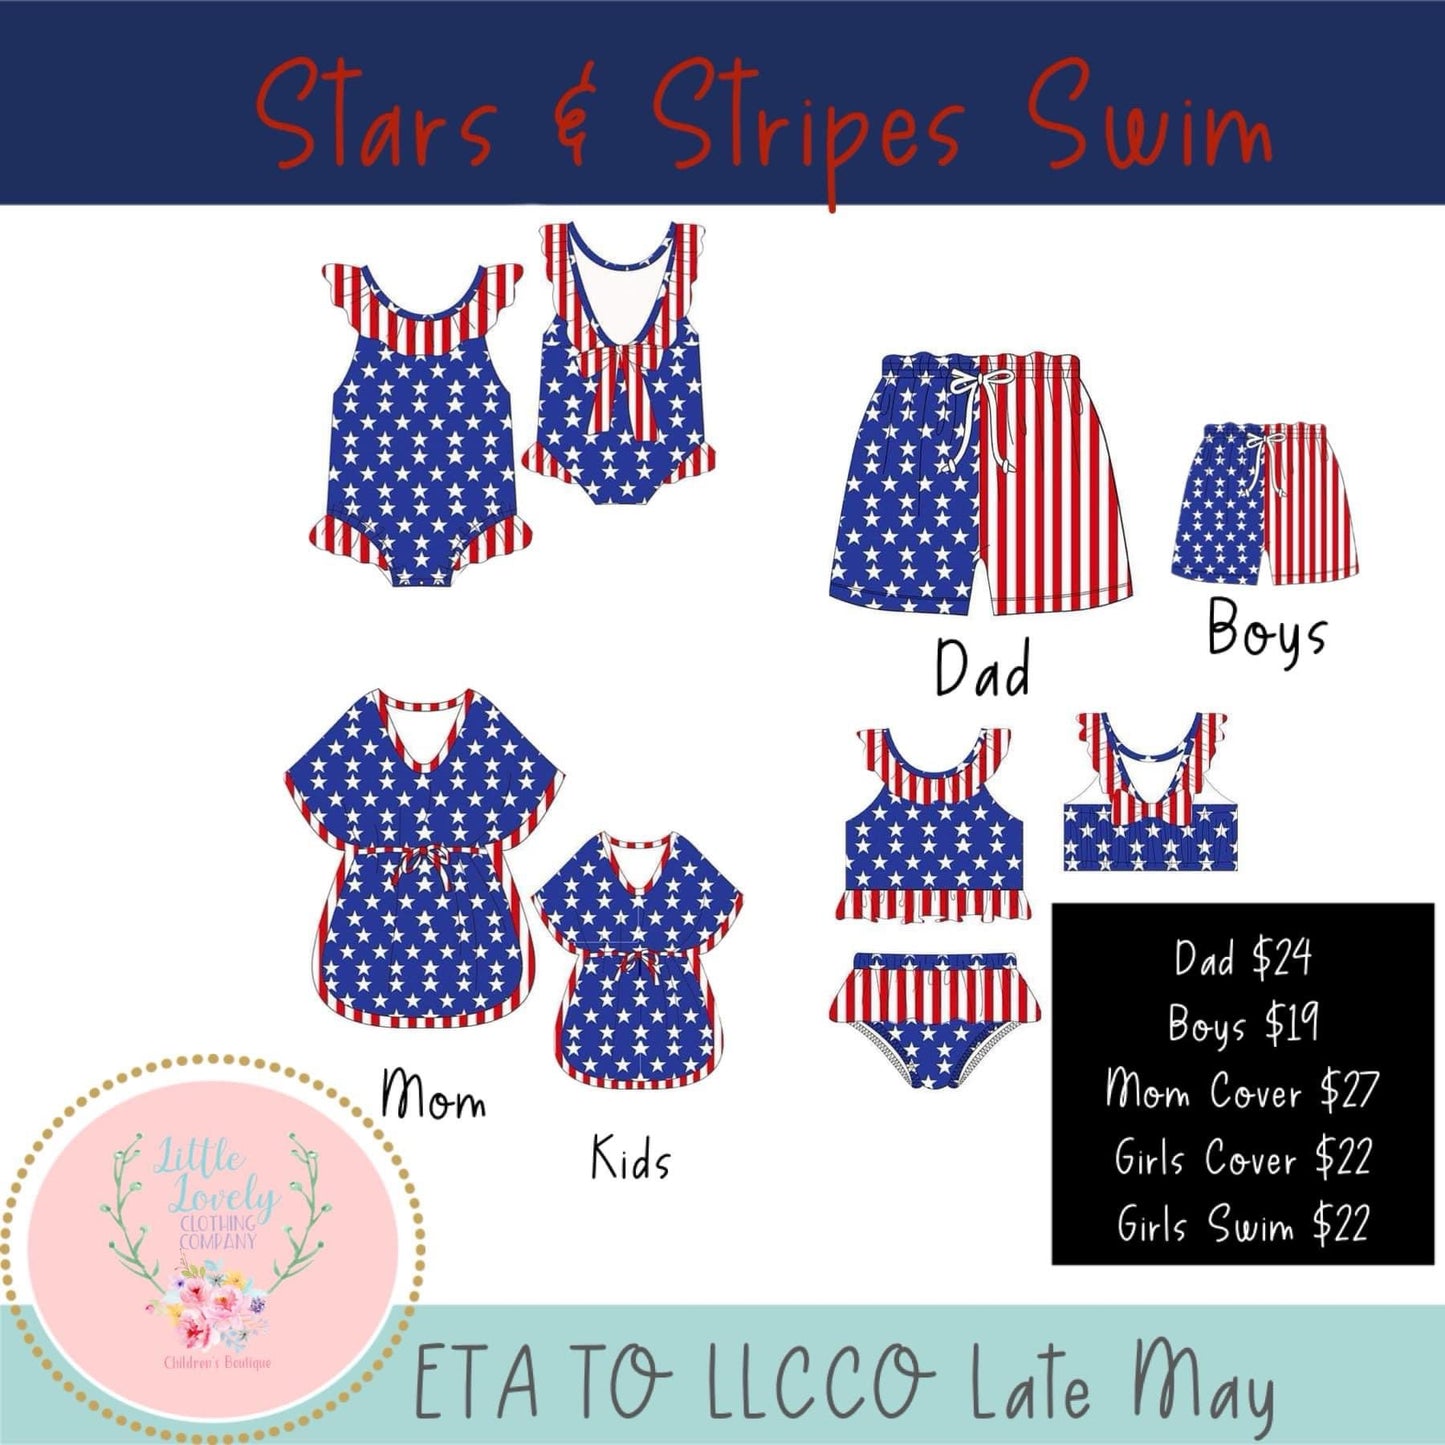 Stars & Stripes Swim Collection (ADULT STYLES), Presale ETA: Late May to LLCCO, then to customers